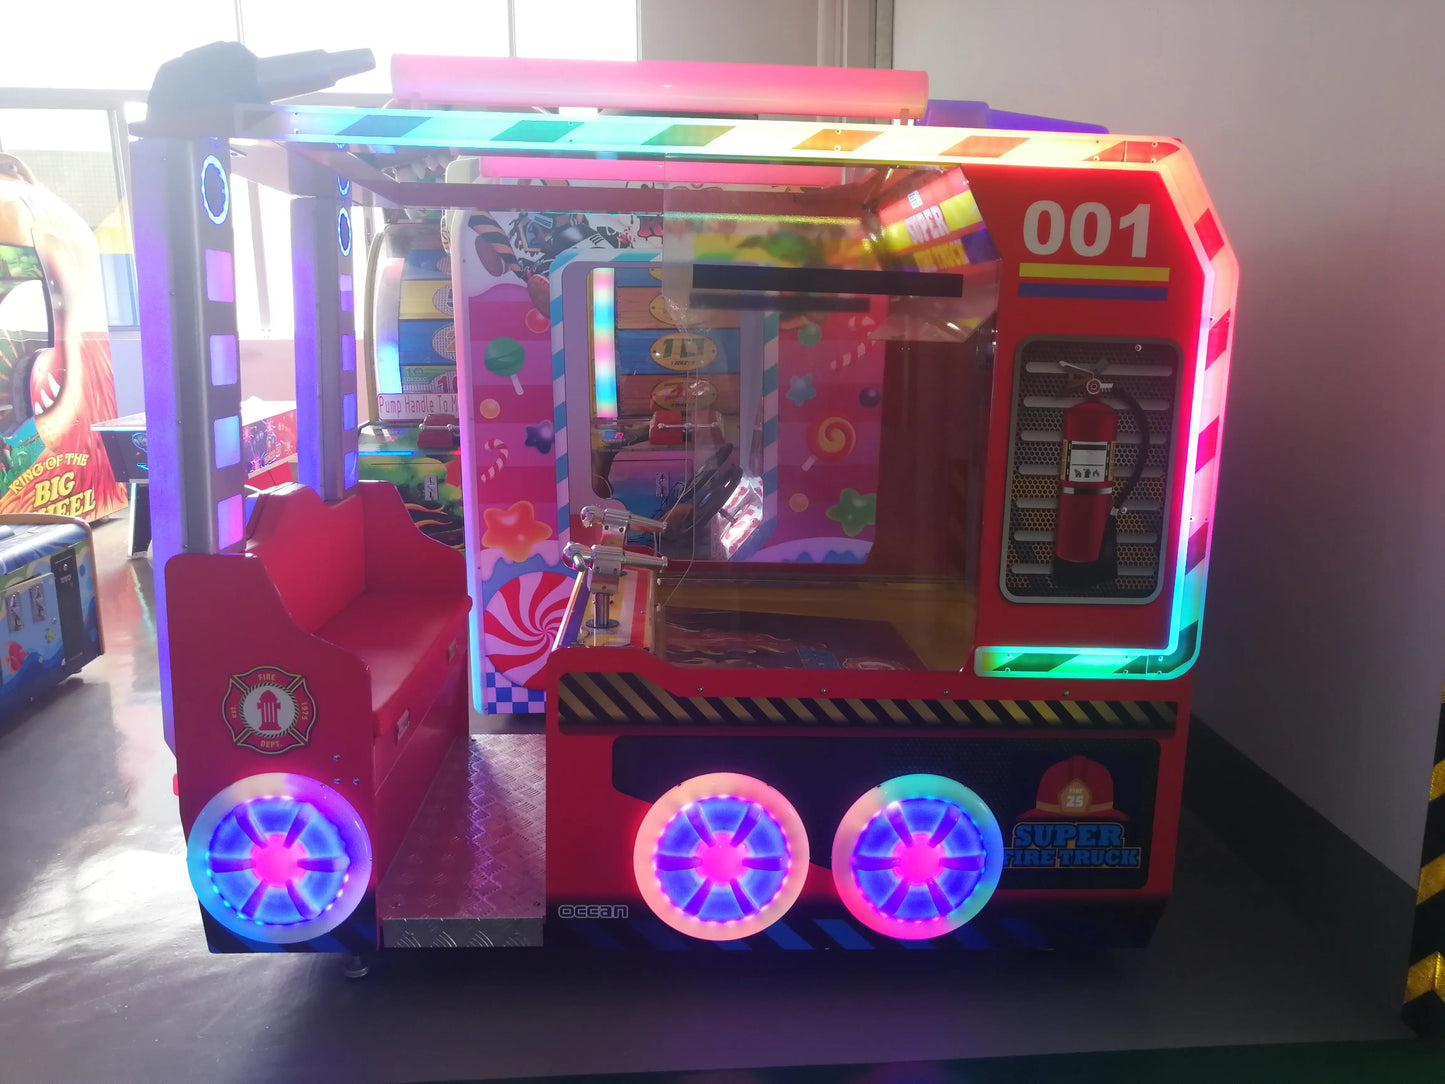 Fire-Truck-Water-shooting-game-machine-Amusement-Coin-Operated-Lottery-Ticket-Redemption-games-for-kids-Tomy-Arcade